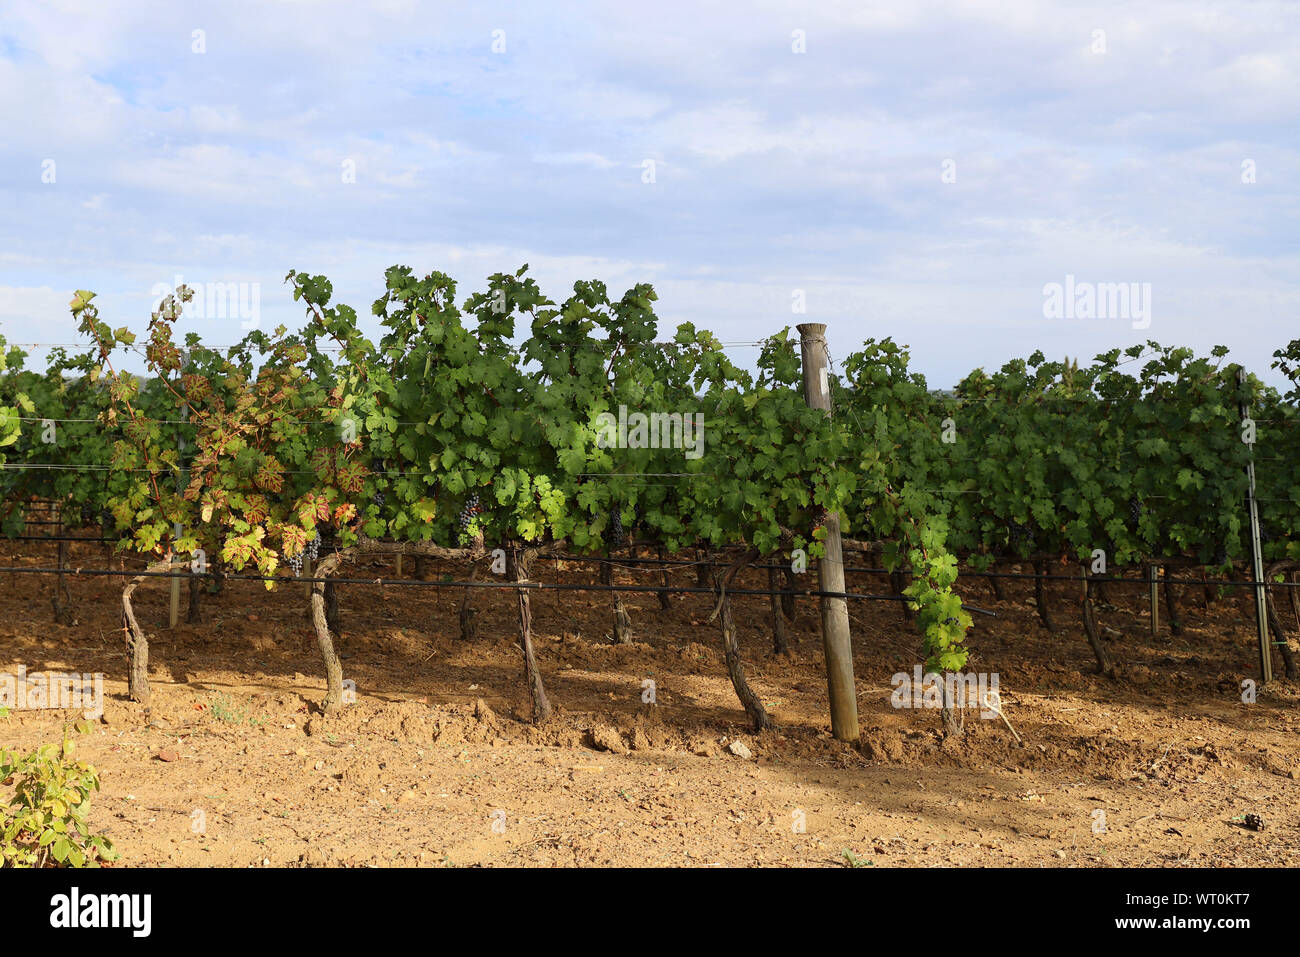 View of vineyards and ripe grapes in Tuscany, Italy Stock Photo